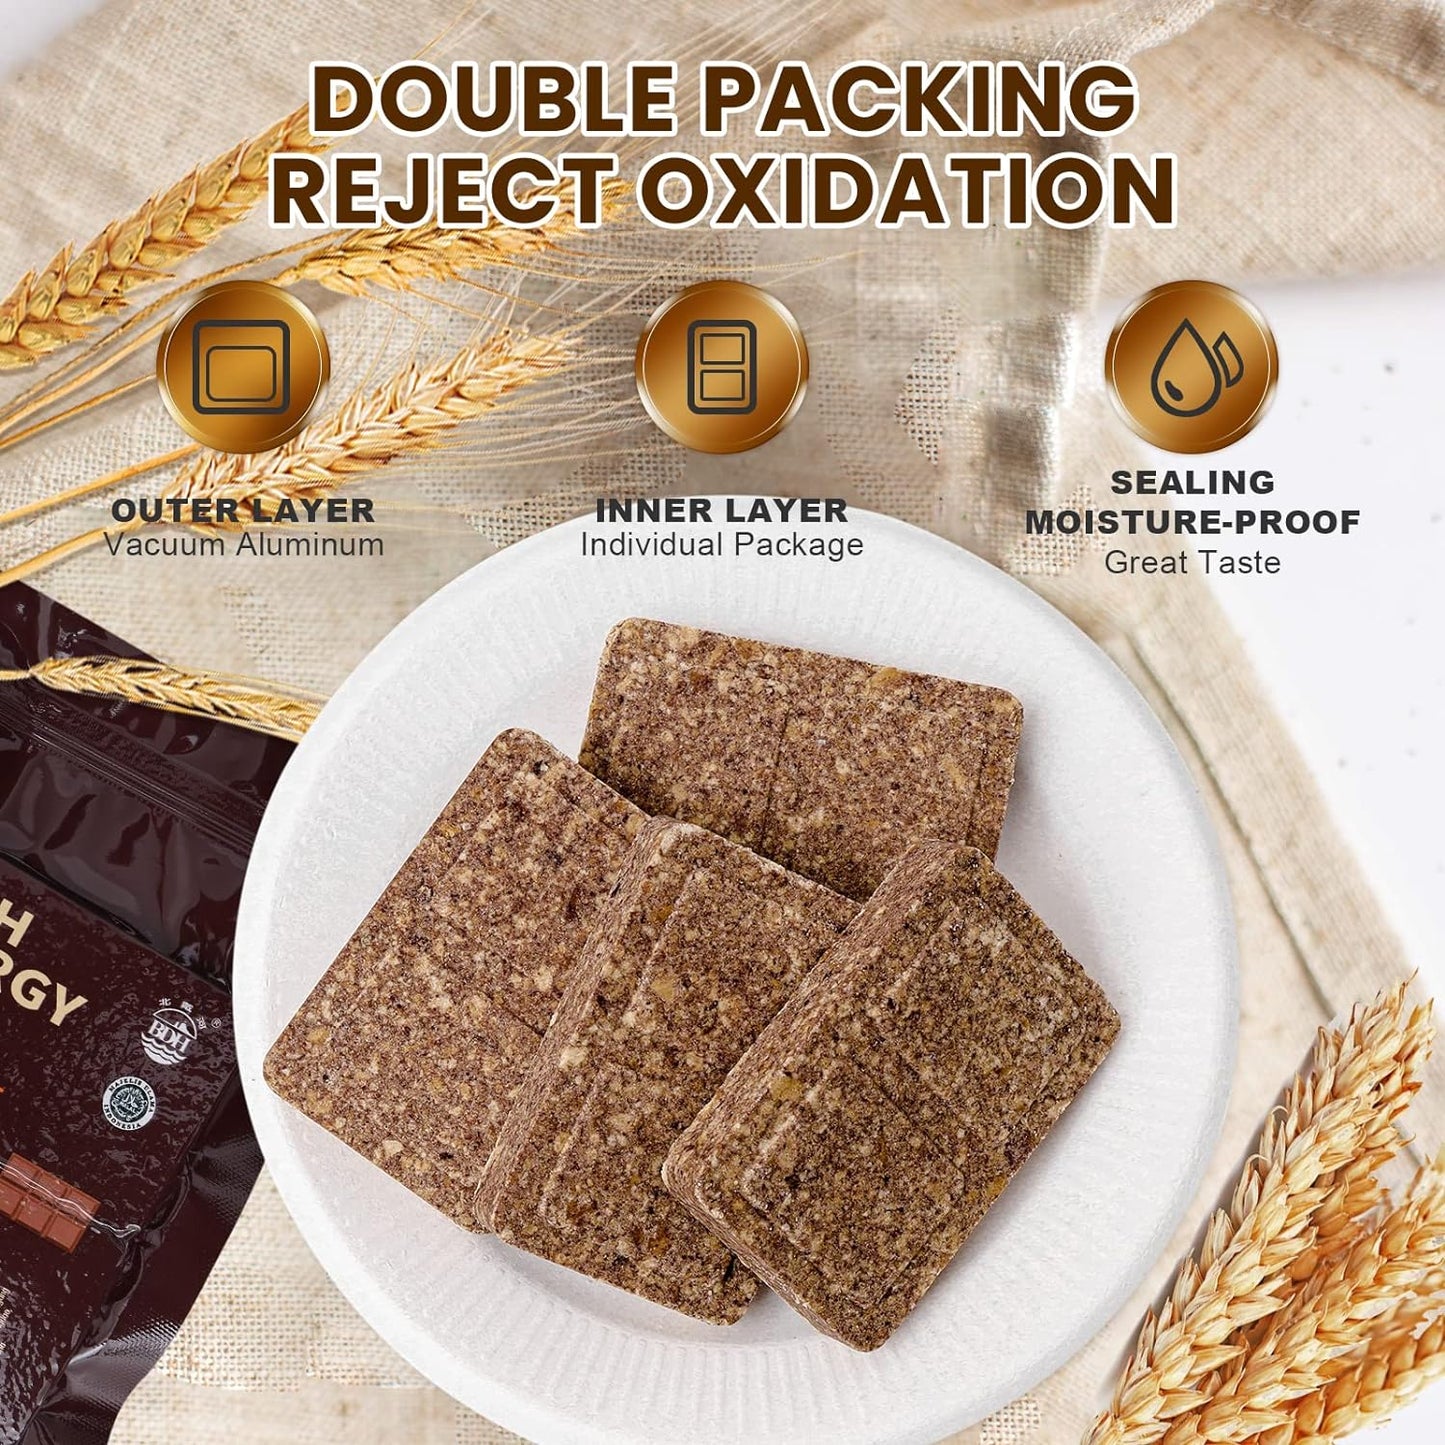 Emergency Food Ration Bars, Chocolate Flavor Survival Tabs Supply for Outdoor Camping Emergency Snowstorm Earthquake Disaster Preparedness Kit with Long Self Life 12 Count